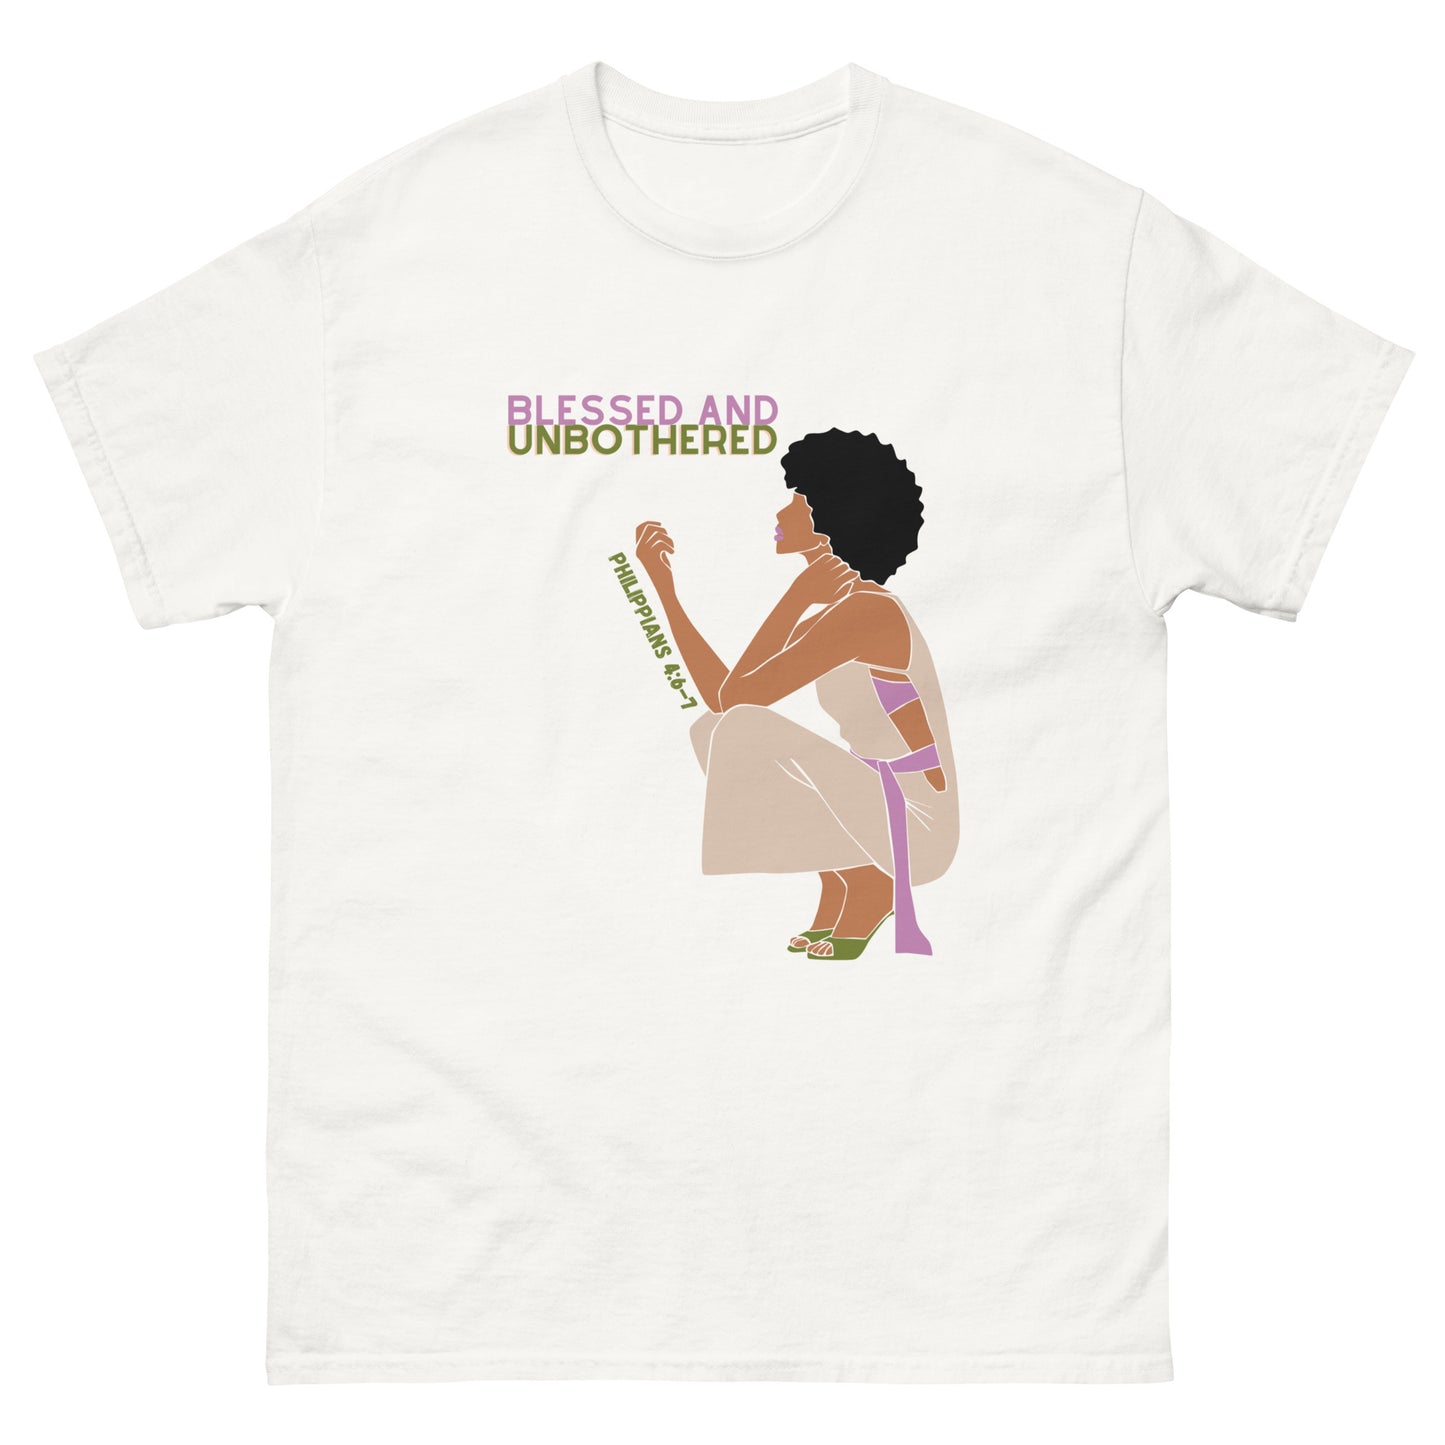 BLESSED & UNBOTHERED Adult T-SHIRT